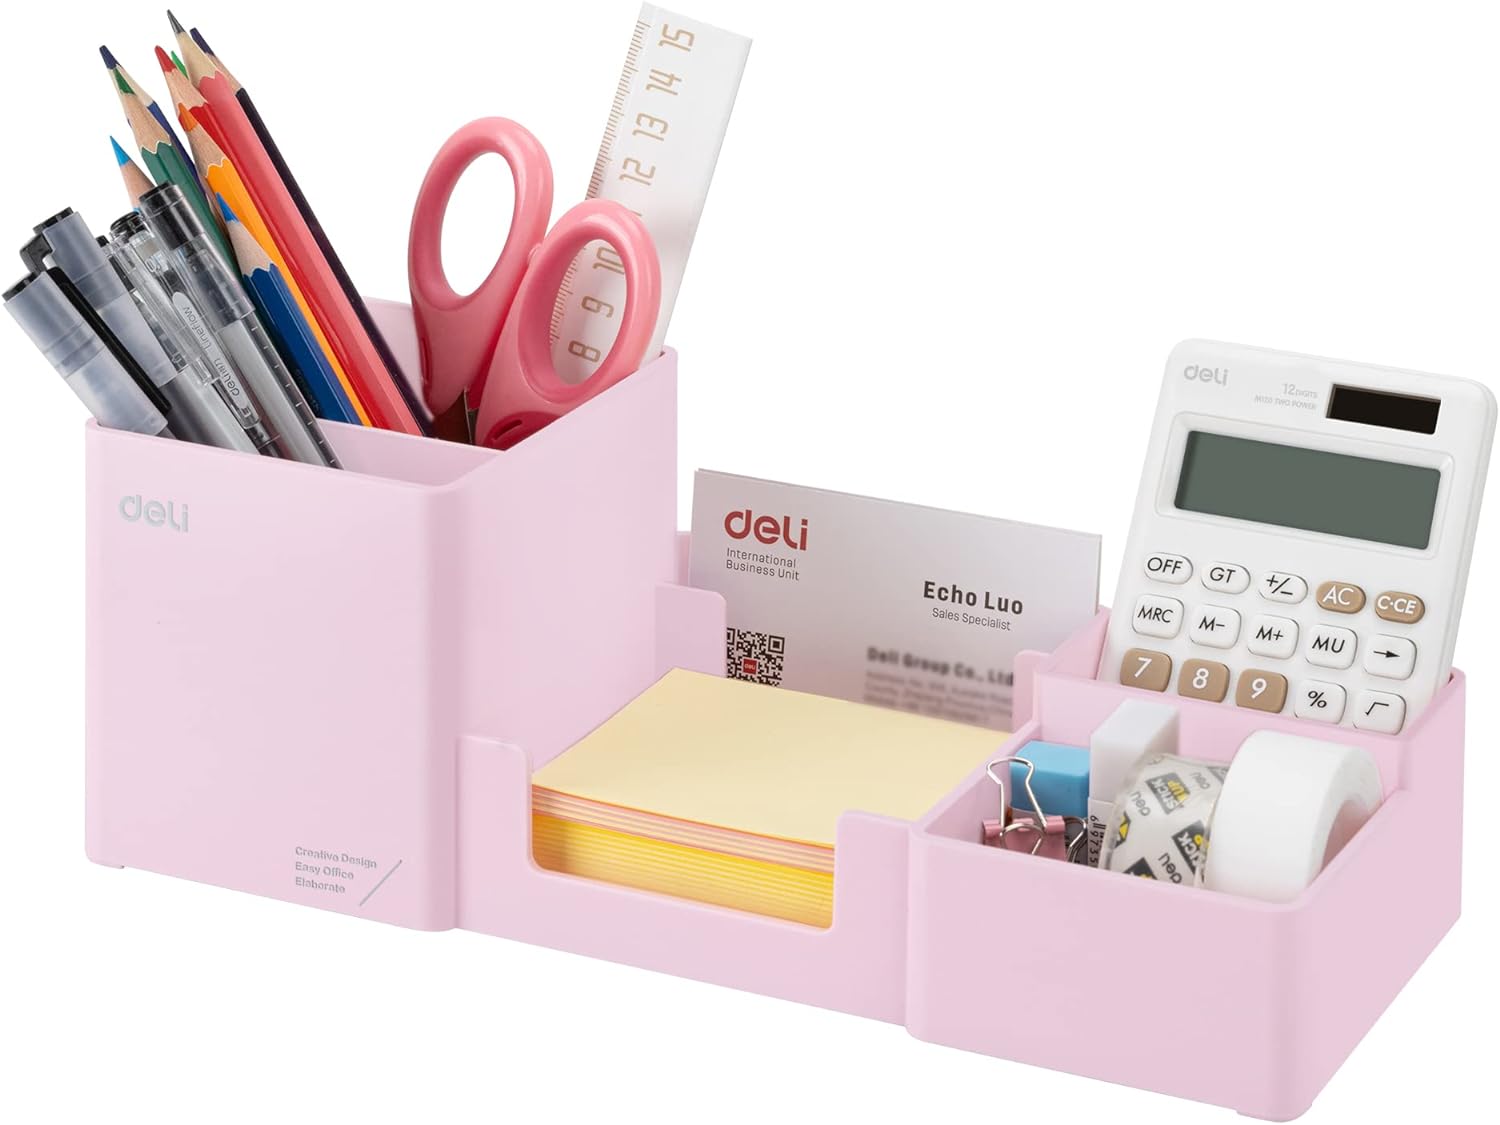 deli Desk Organizer, Plastic Desktop Organizer with Pencil Holder and Sticky Note Tray, Office Stationery Supplies Organizers Accessories Caddy, 6 Compartments, Pink